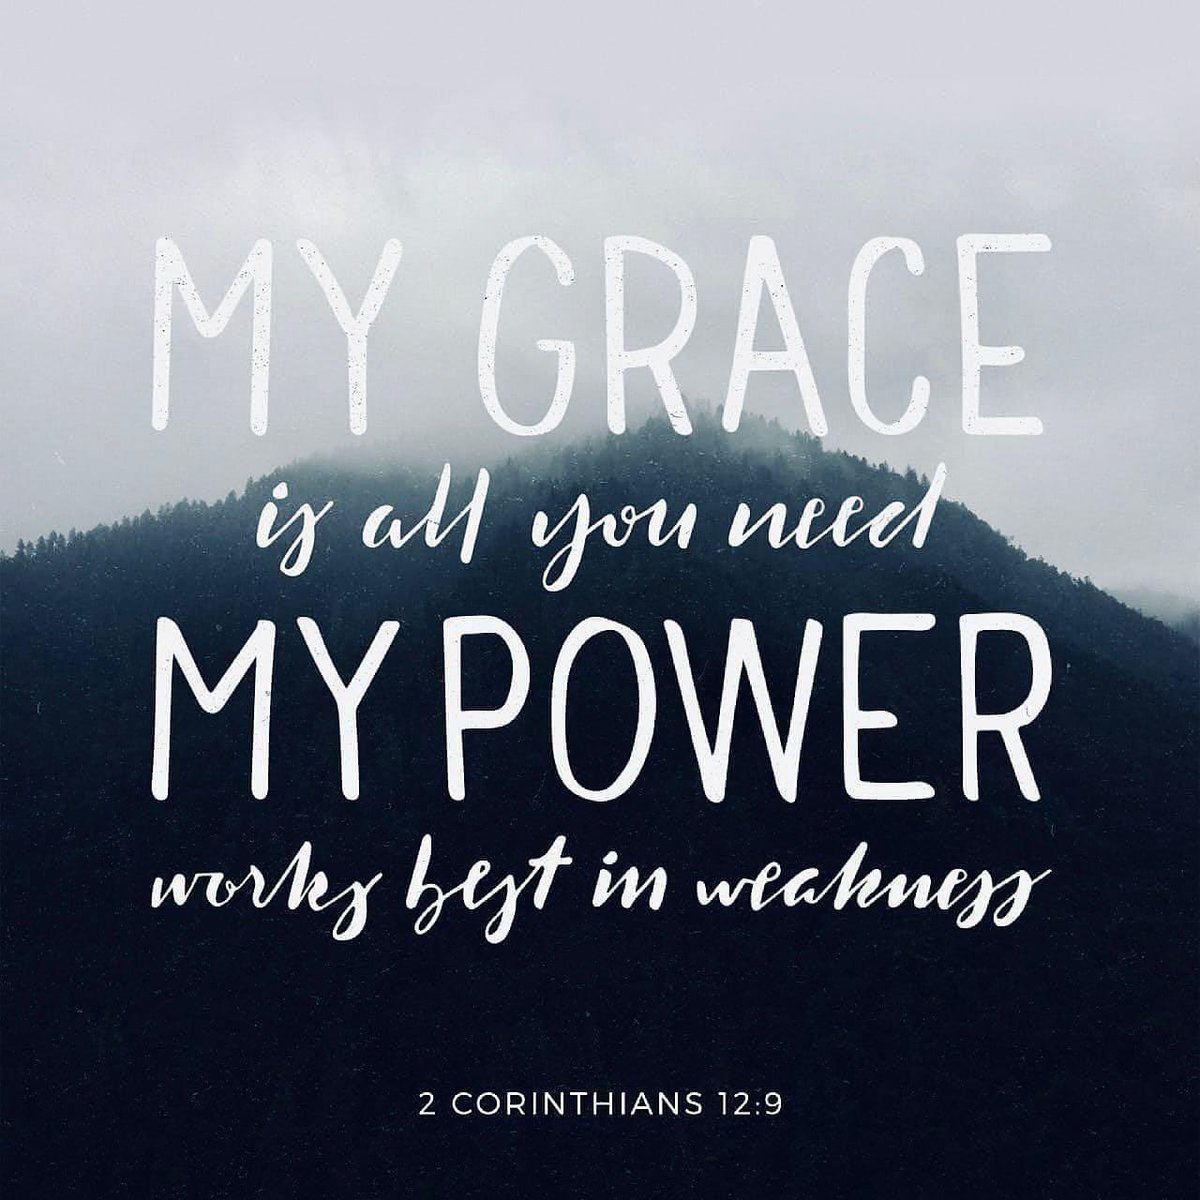 God’s grace is what we need. His power works best in our weakness. ❤ #grace #godsgrace #godspower #godisourstrength #godwillhelpyou #youversion